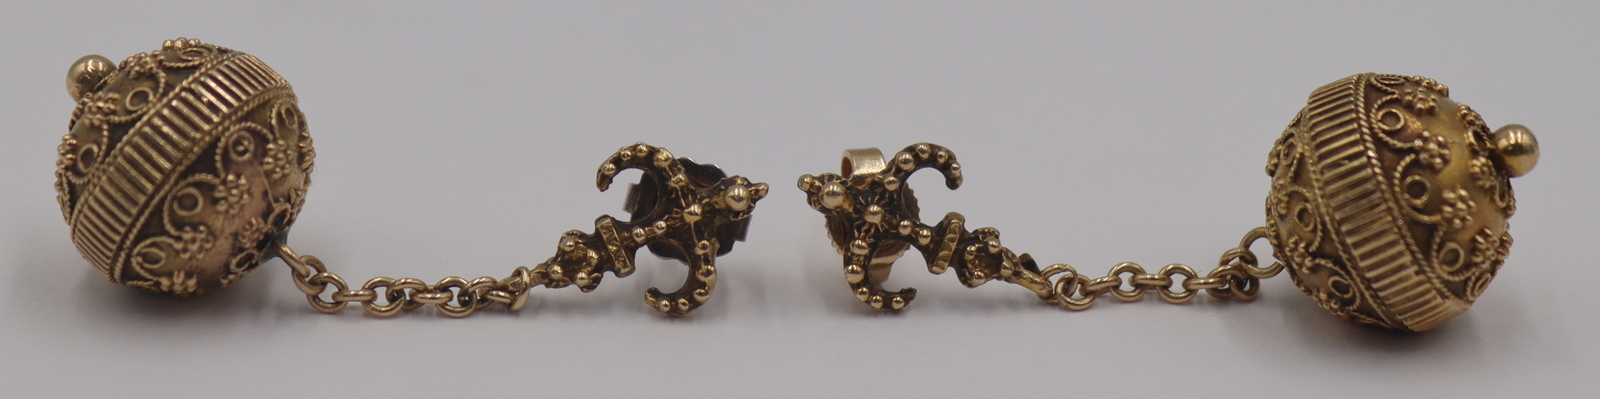 JEWELRY PAIR OF ETRUSCAN REVIVAL 3bc2c8